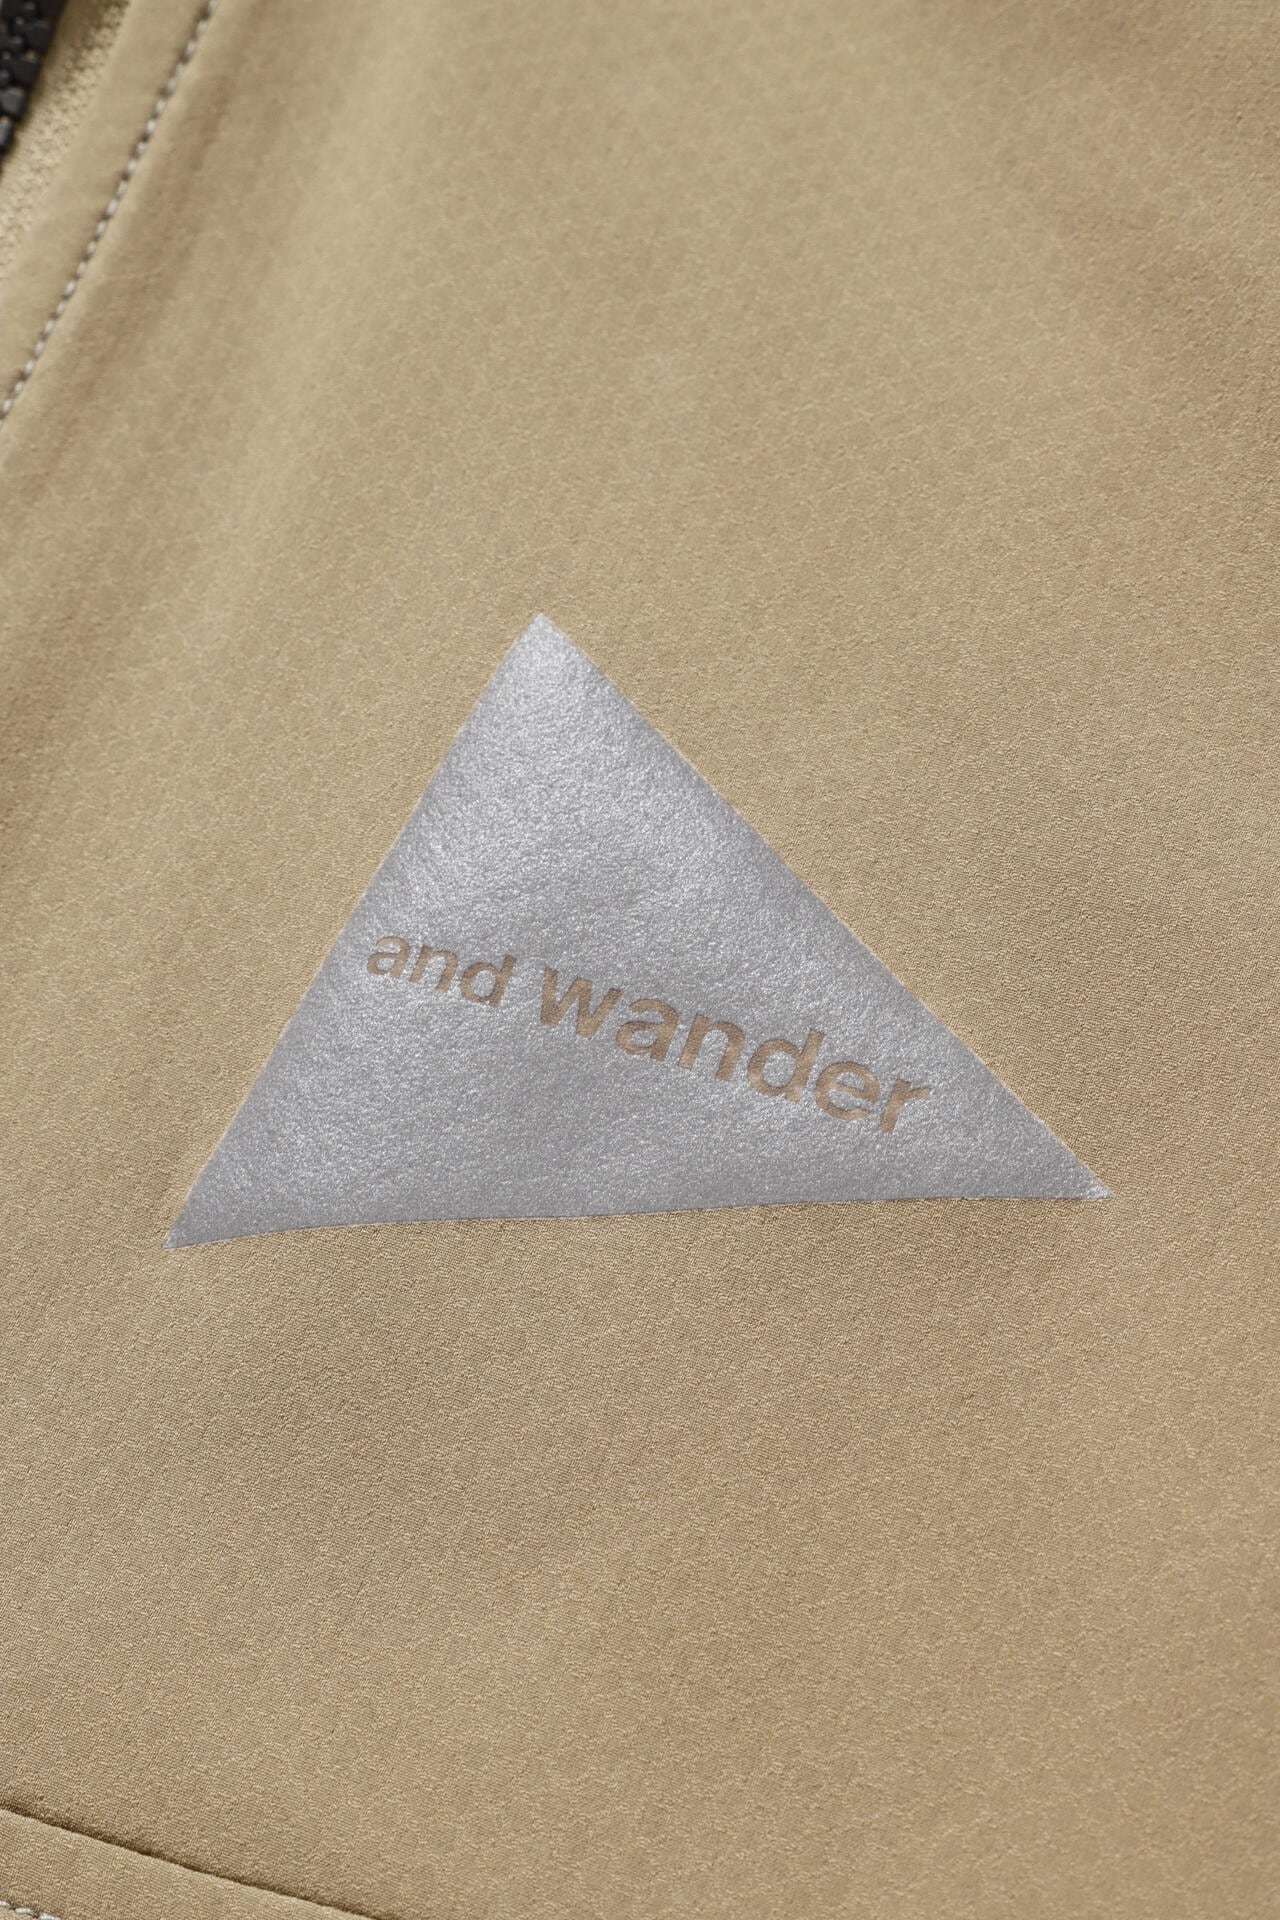 light stretch shell jacket | outerwear | and wander ONLINE STORE